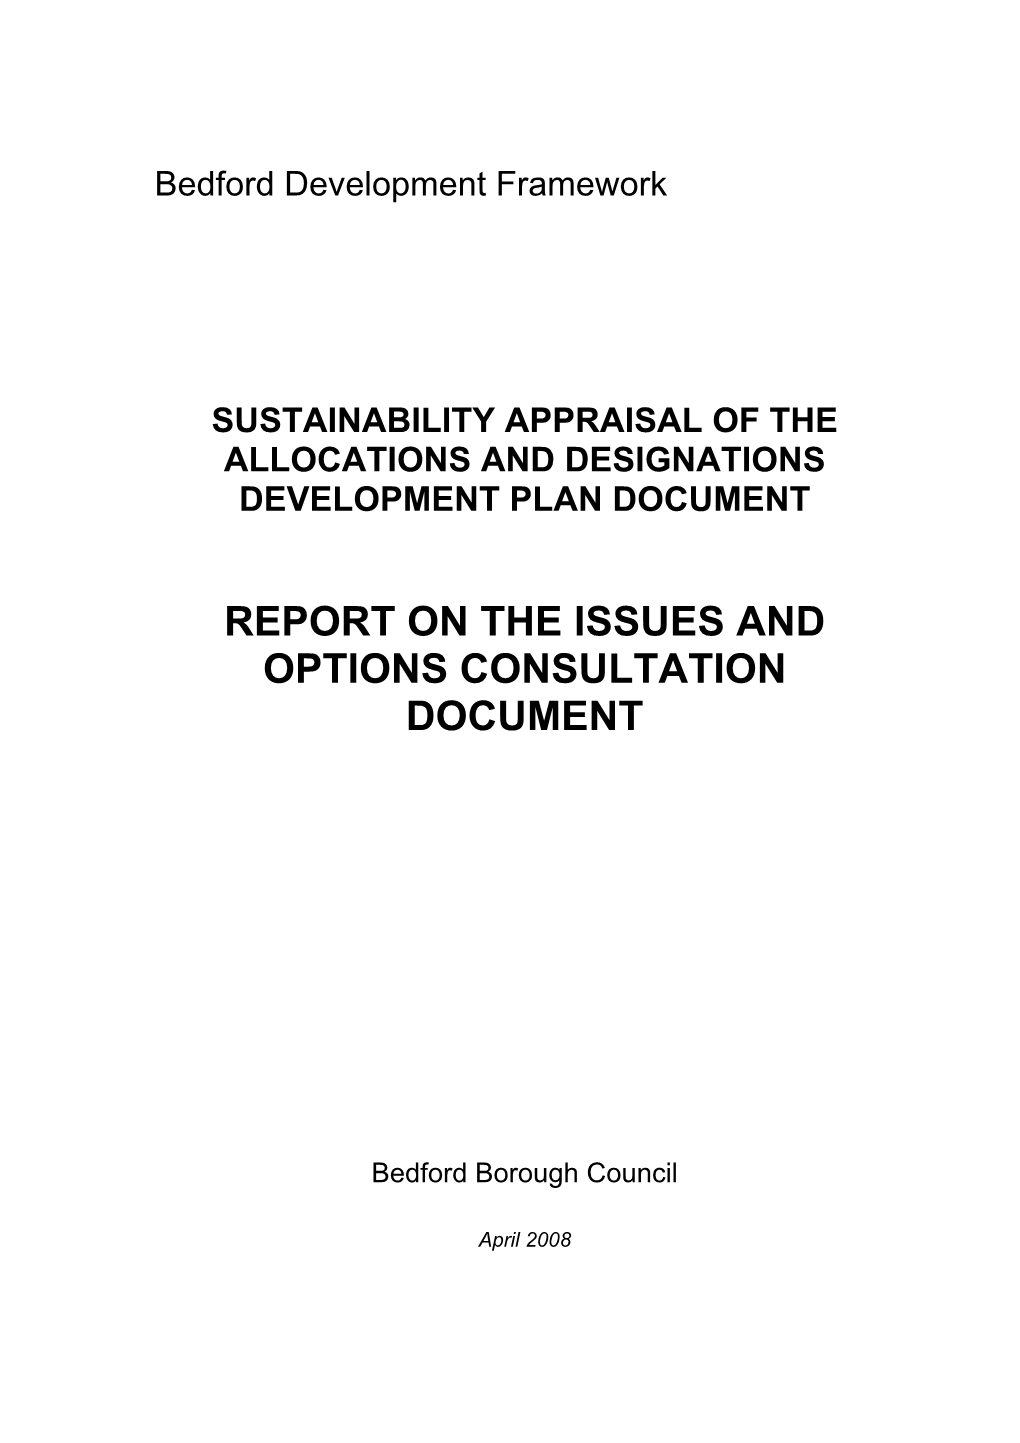 Report on the Issues and Options Consultation Document